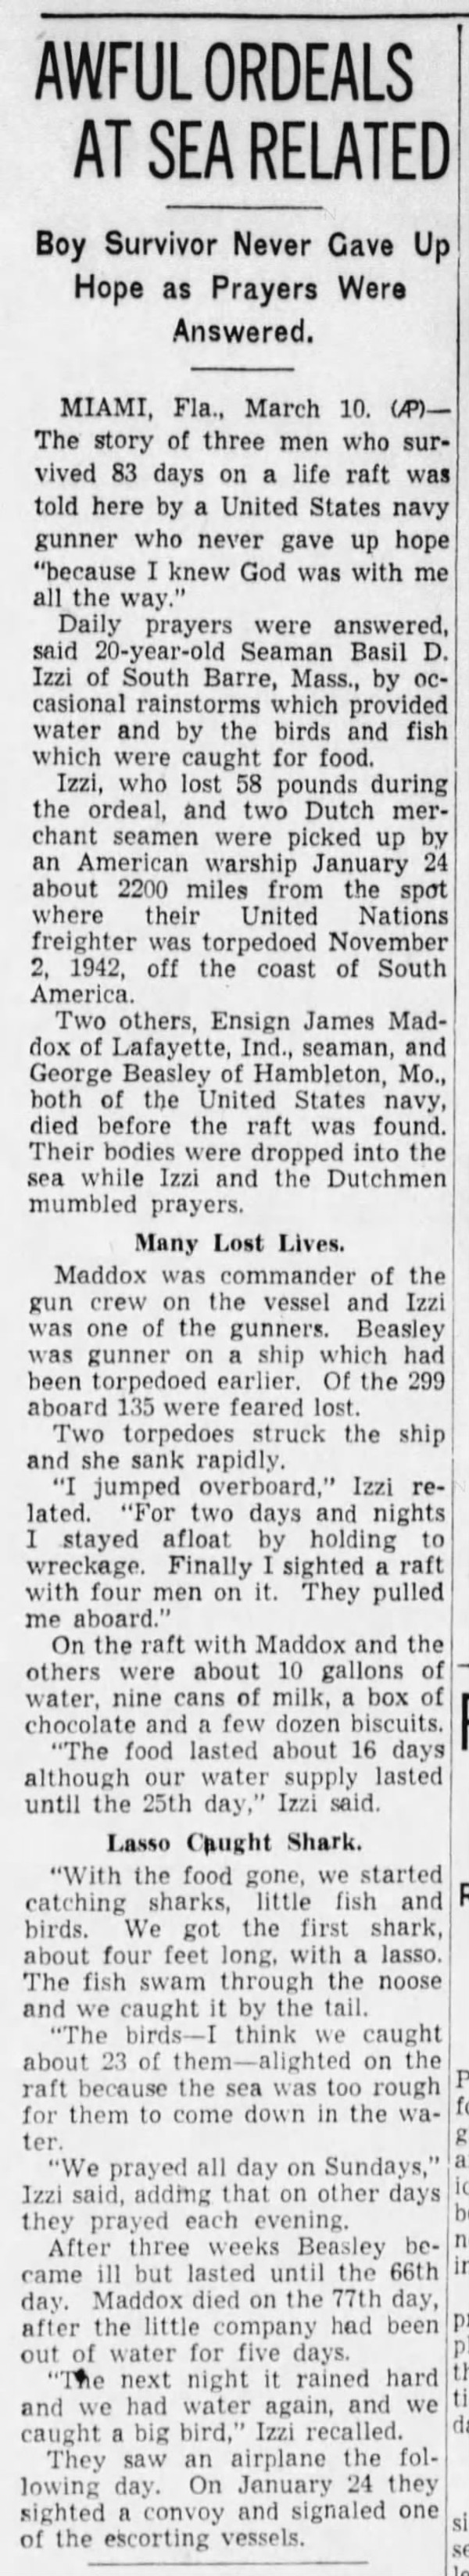 Newspaper Article with title: Awful Ordeals at Sea Related.